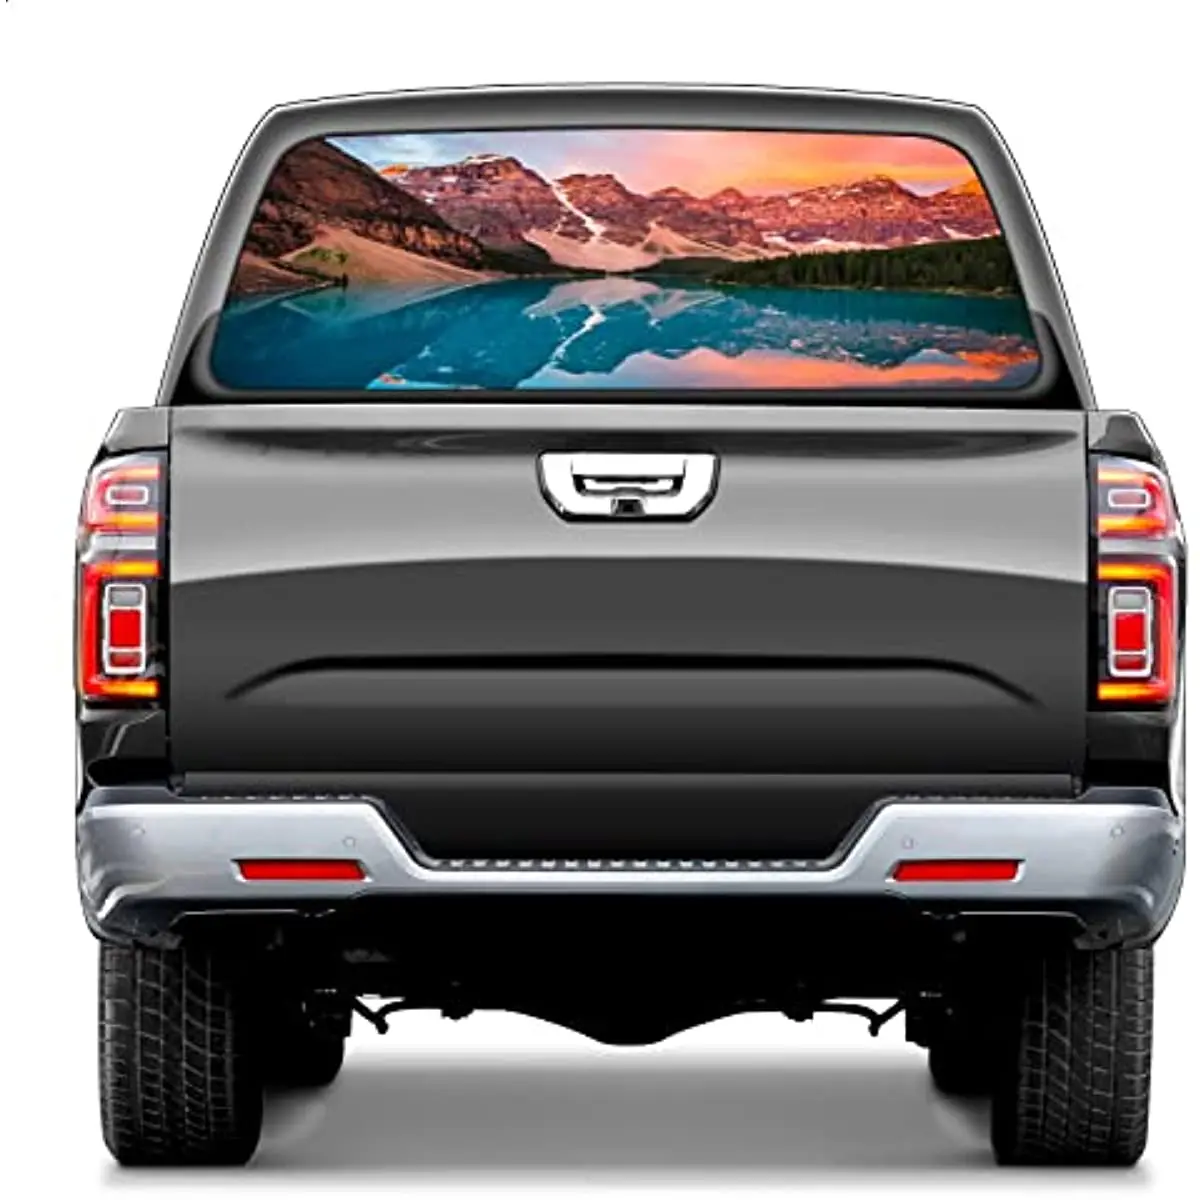 

Truck Rear Window Graphic Decals Moraine Lake Rocky Mountains Pickup Car Window Stickers 66" x 22" Truck Back Window Perforated